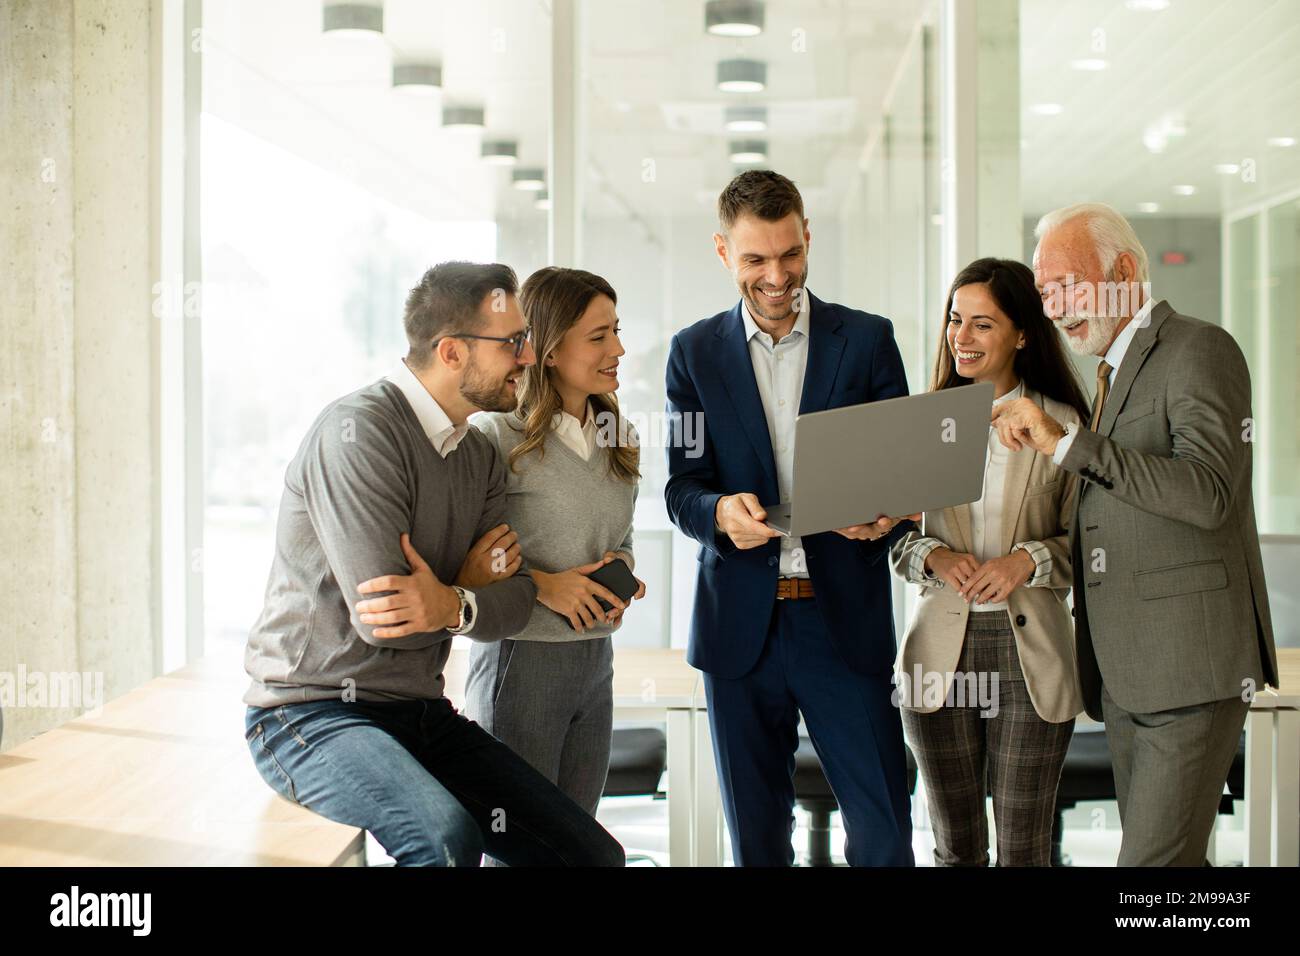 Group of businessmen and businesswomen working together in office Stock Photo